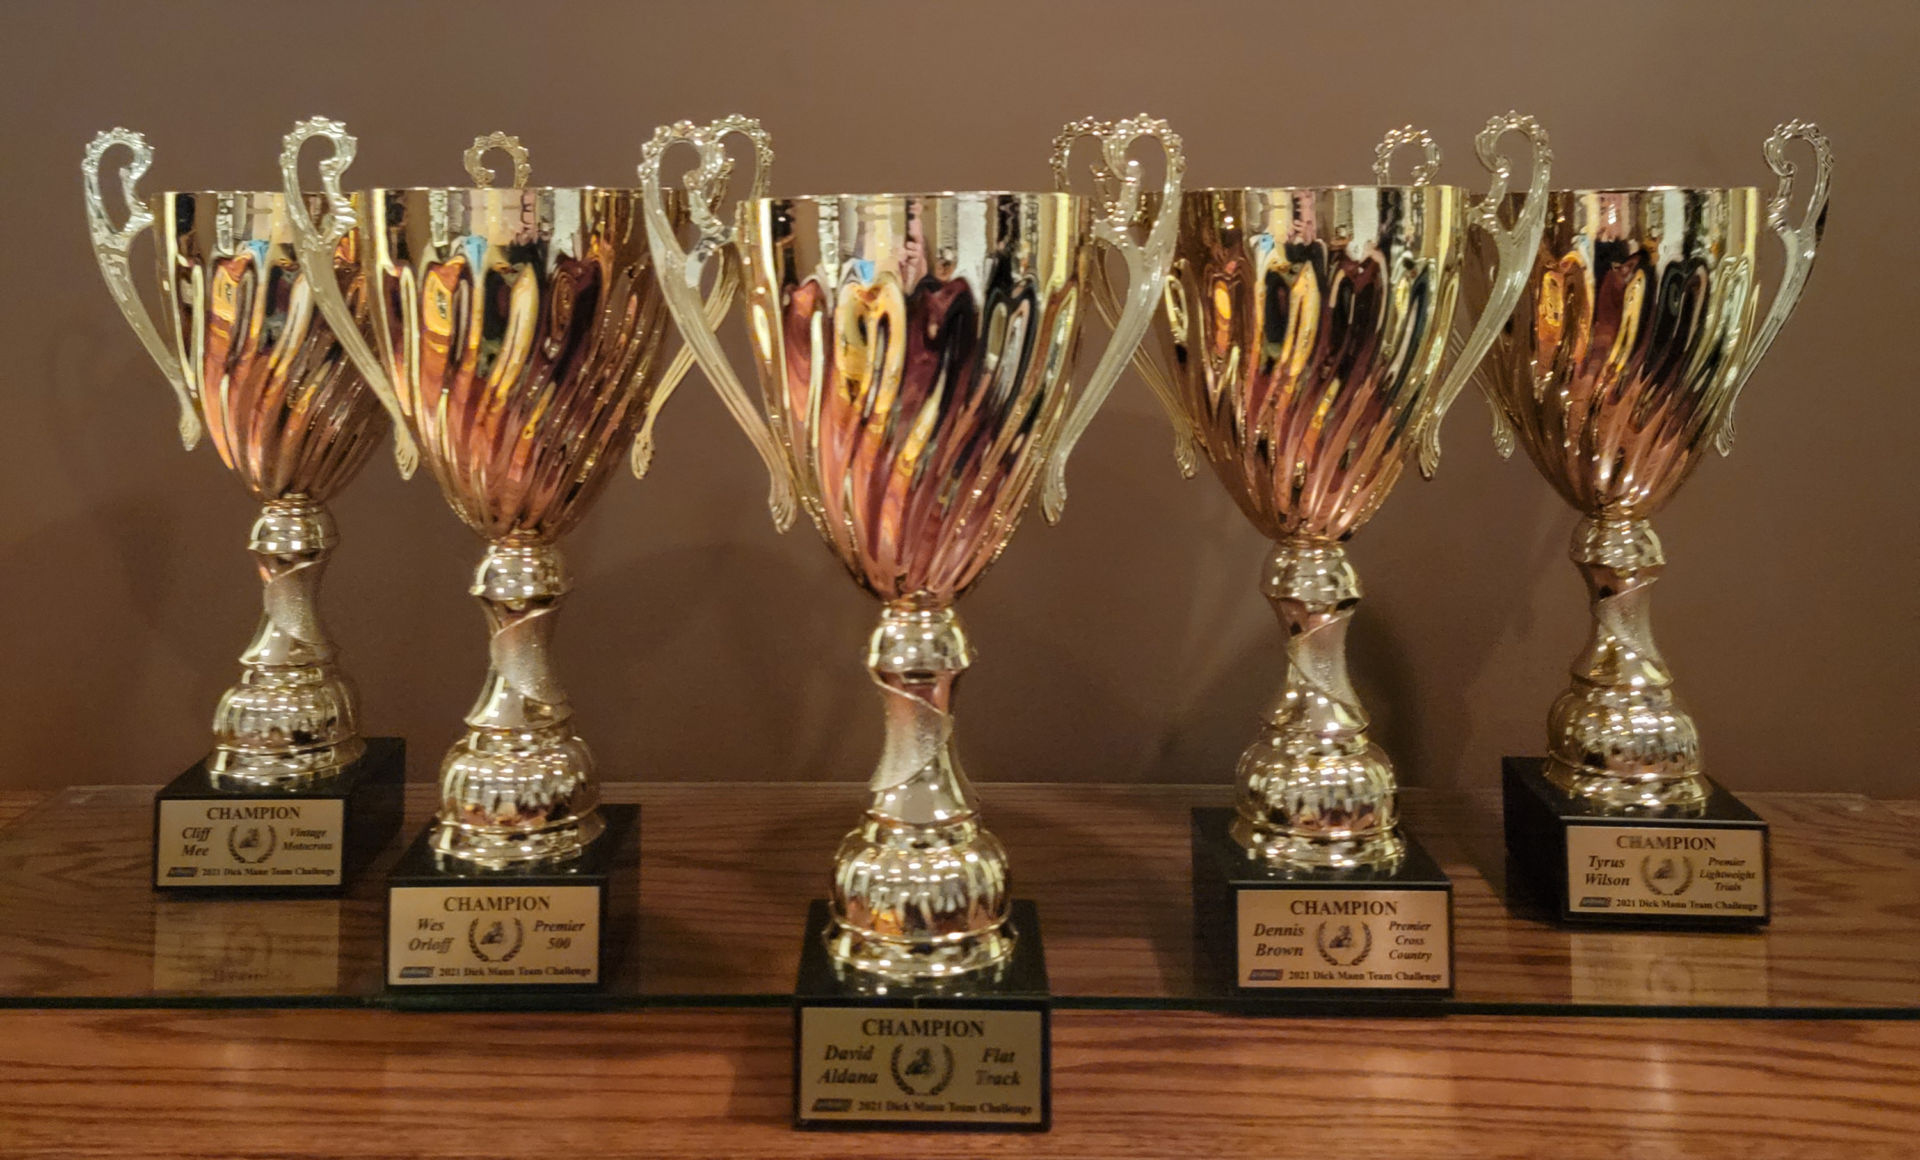 The 2021 Inaugural Dick Mann Team Challenge trophies. Team winners include (from left to right) Cliff Mee (Vintage MX), Wes Orloff (Road Racing - Premier 500), David Aldana (Flat Track), Dennis Brown (Premier Cross Country), and Tyrus Wilson (Premier Lightweight Trials). Photo by Tim Terrell.